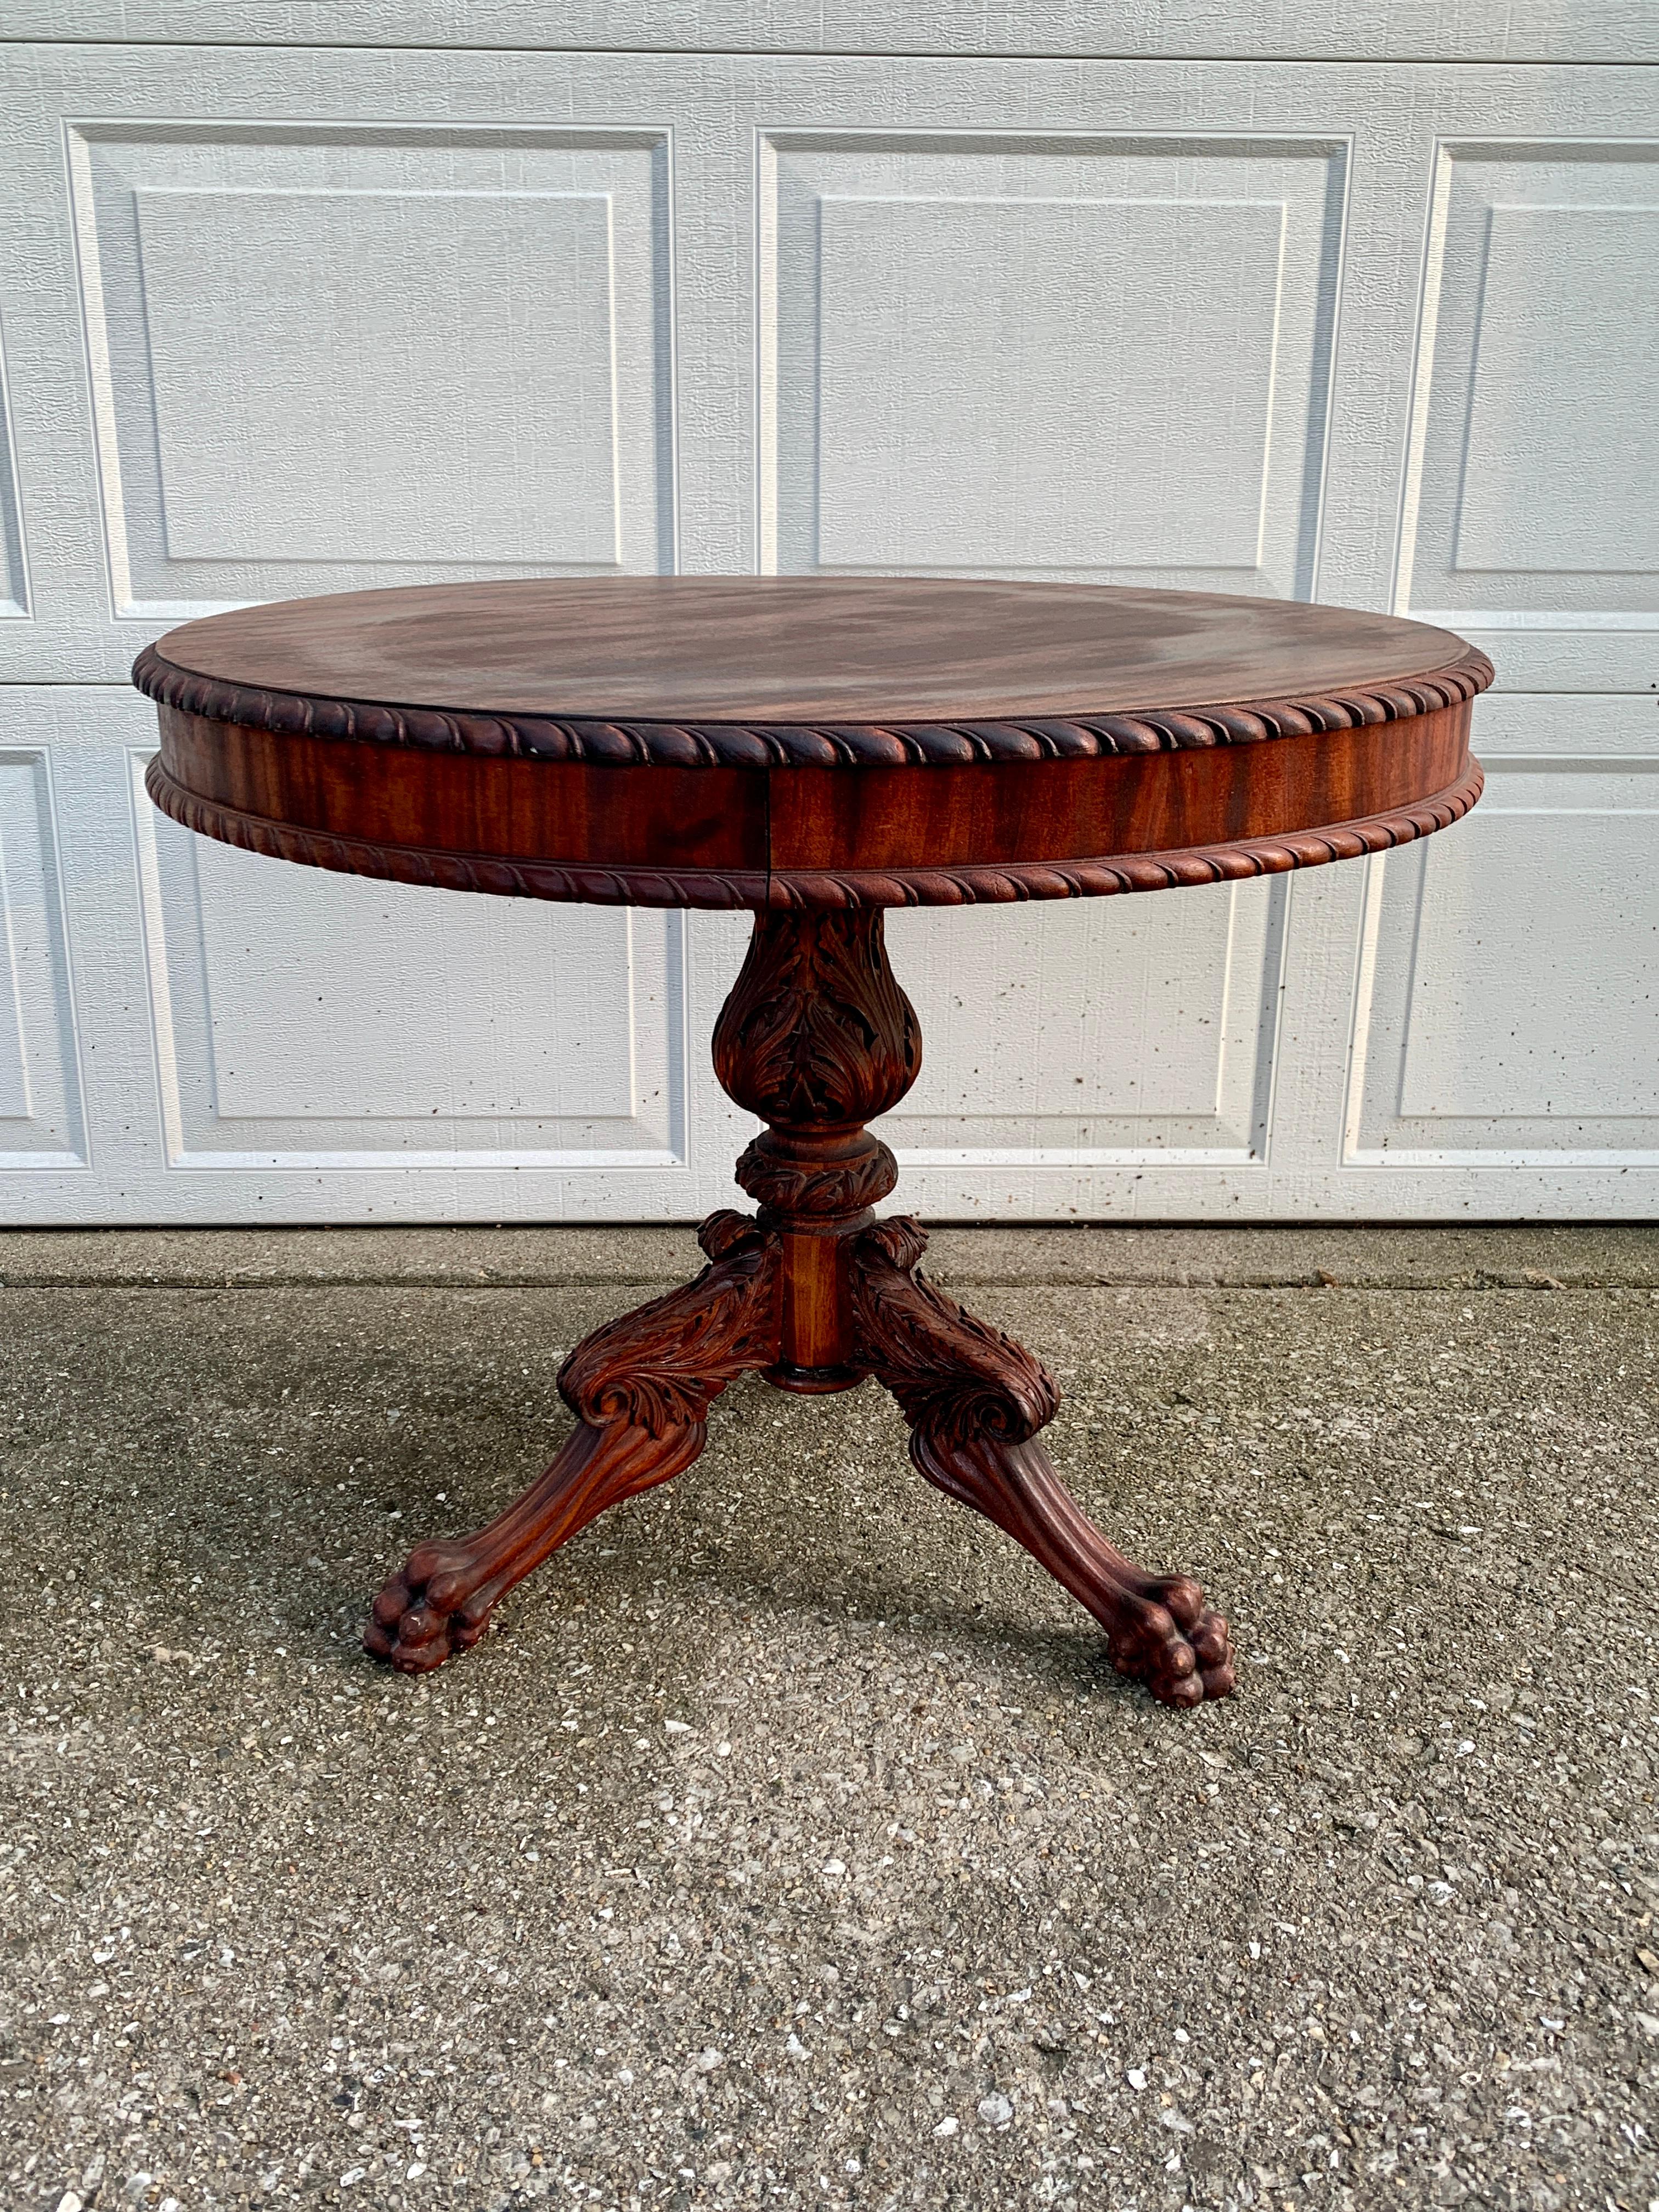 Antique American Empire Mahogany Paw Foot Pedestal Side Table, Late 19th Century For Sale 8